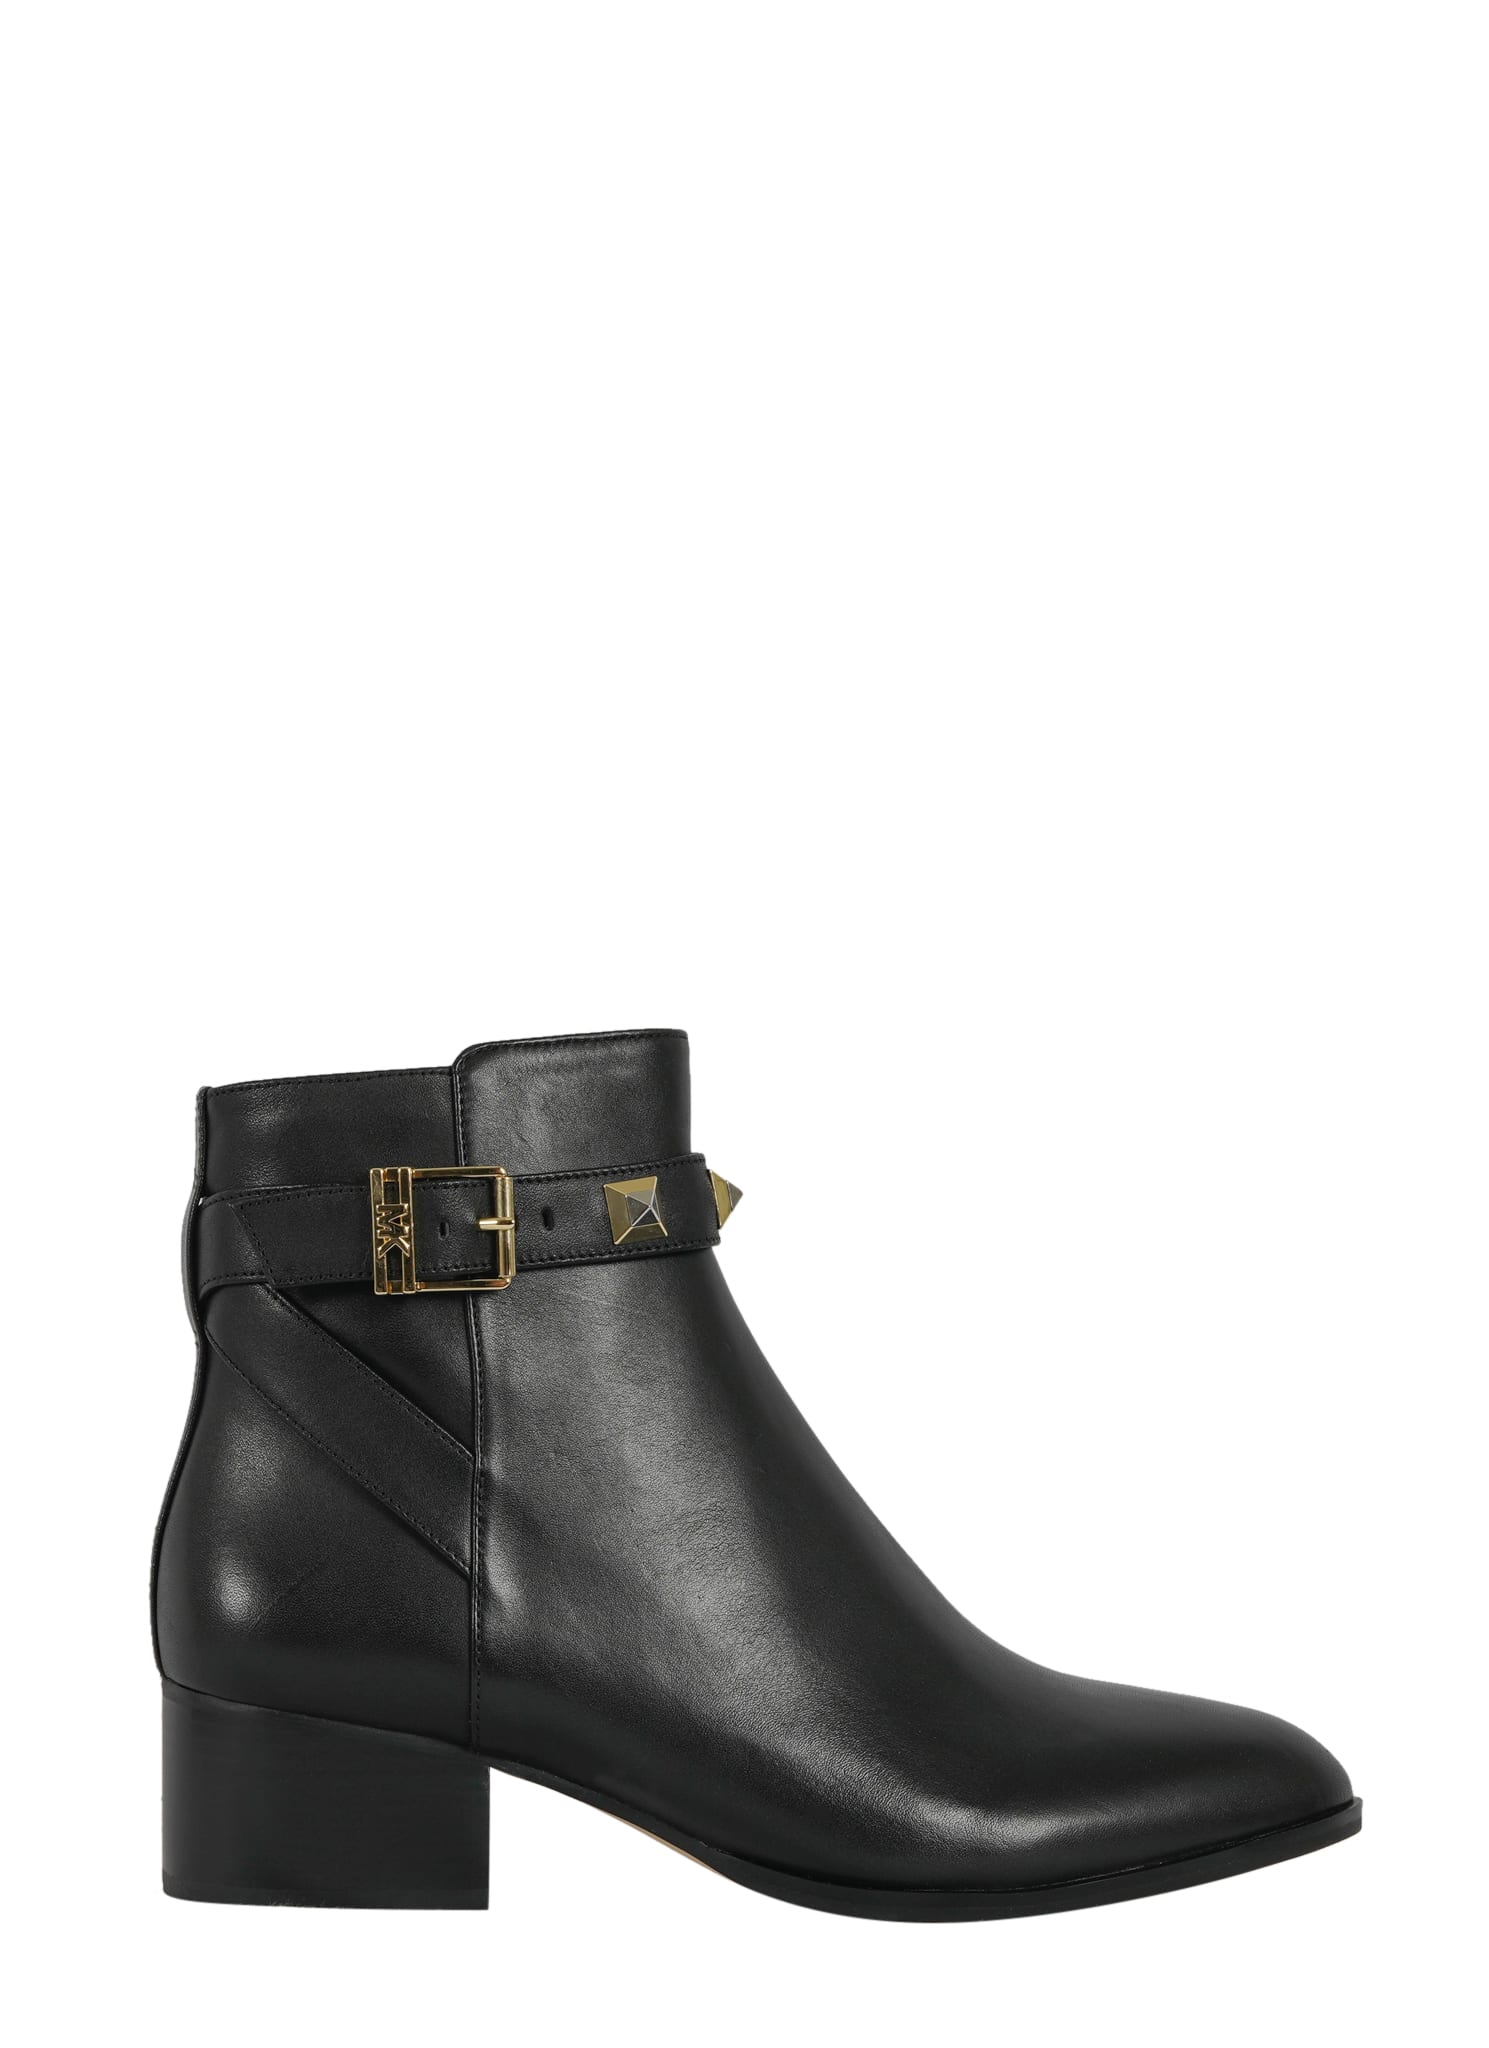 Michael Kors Britton Ankle Boot Boots